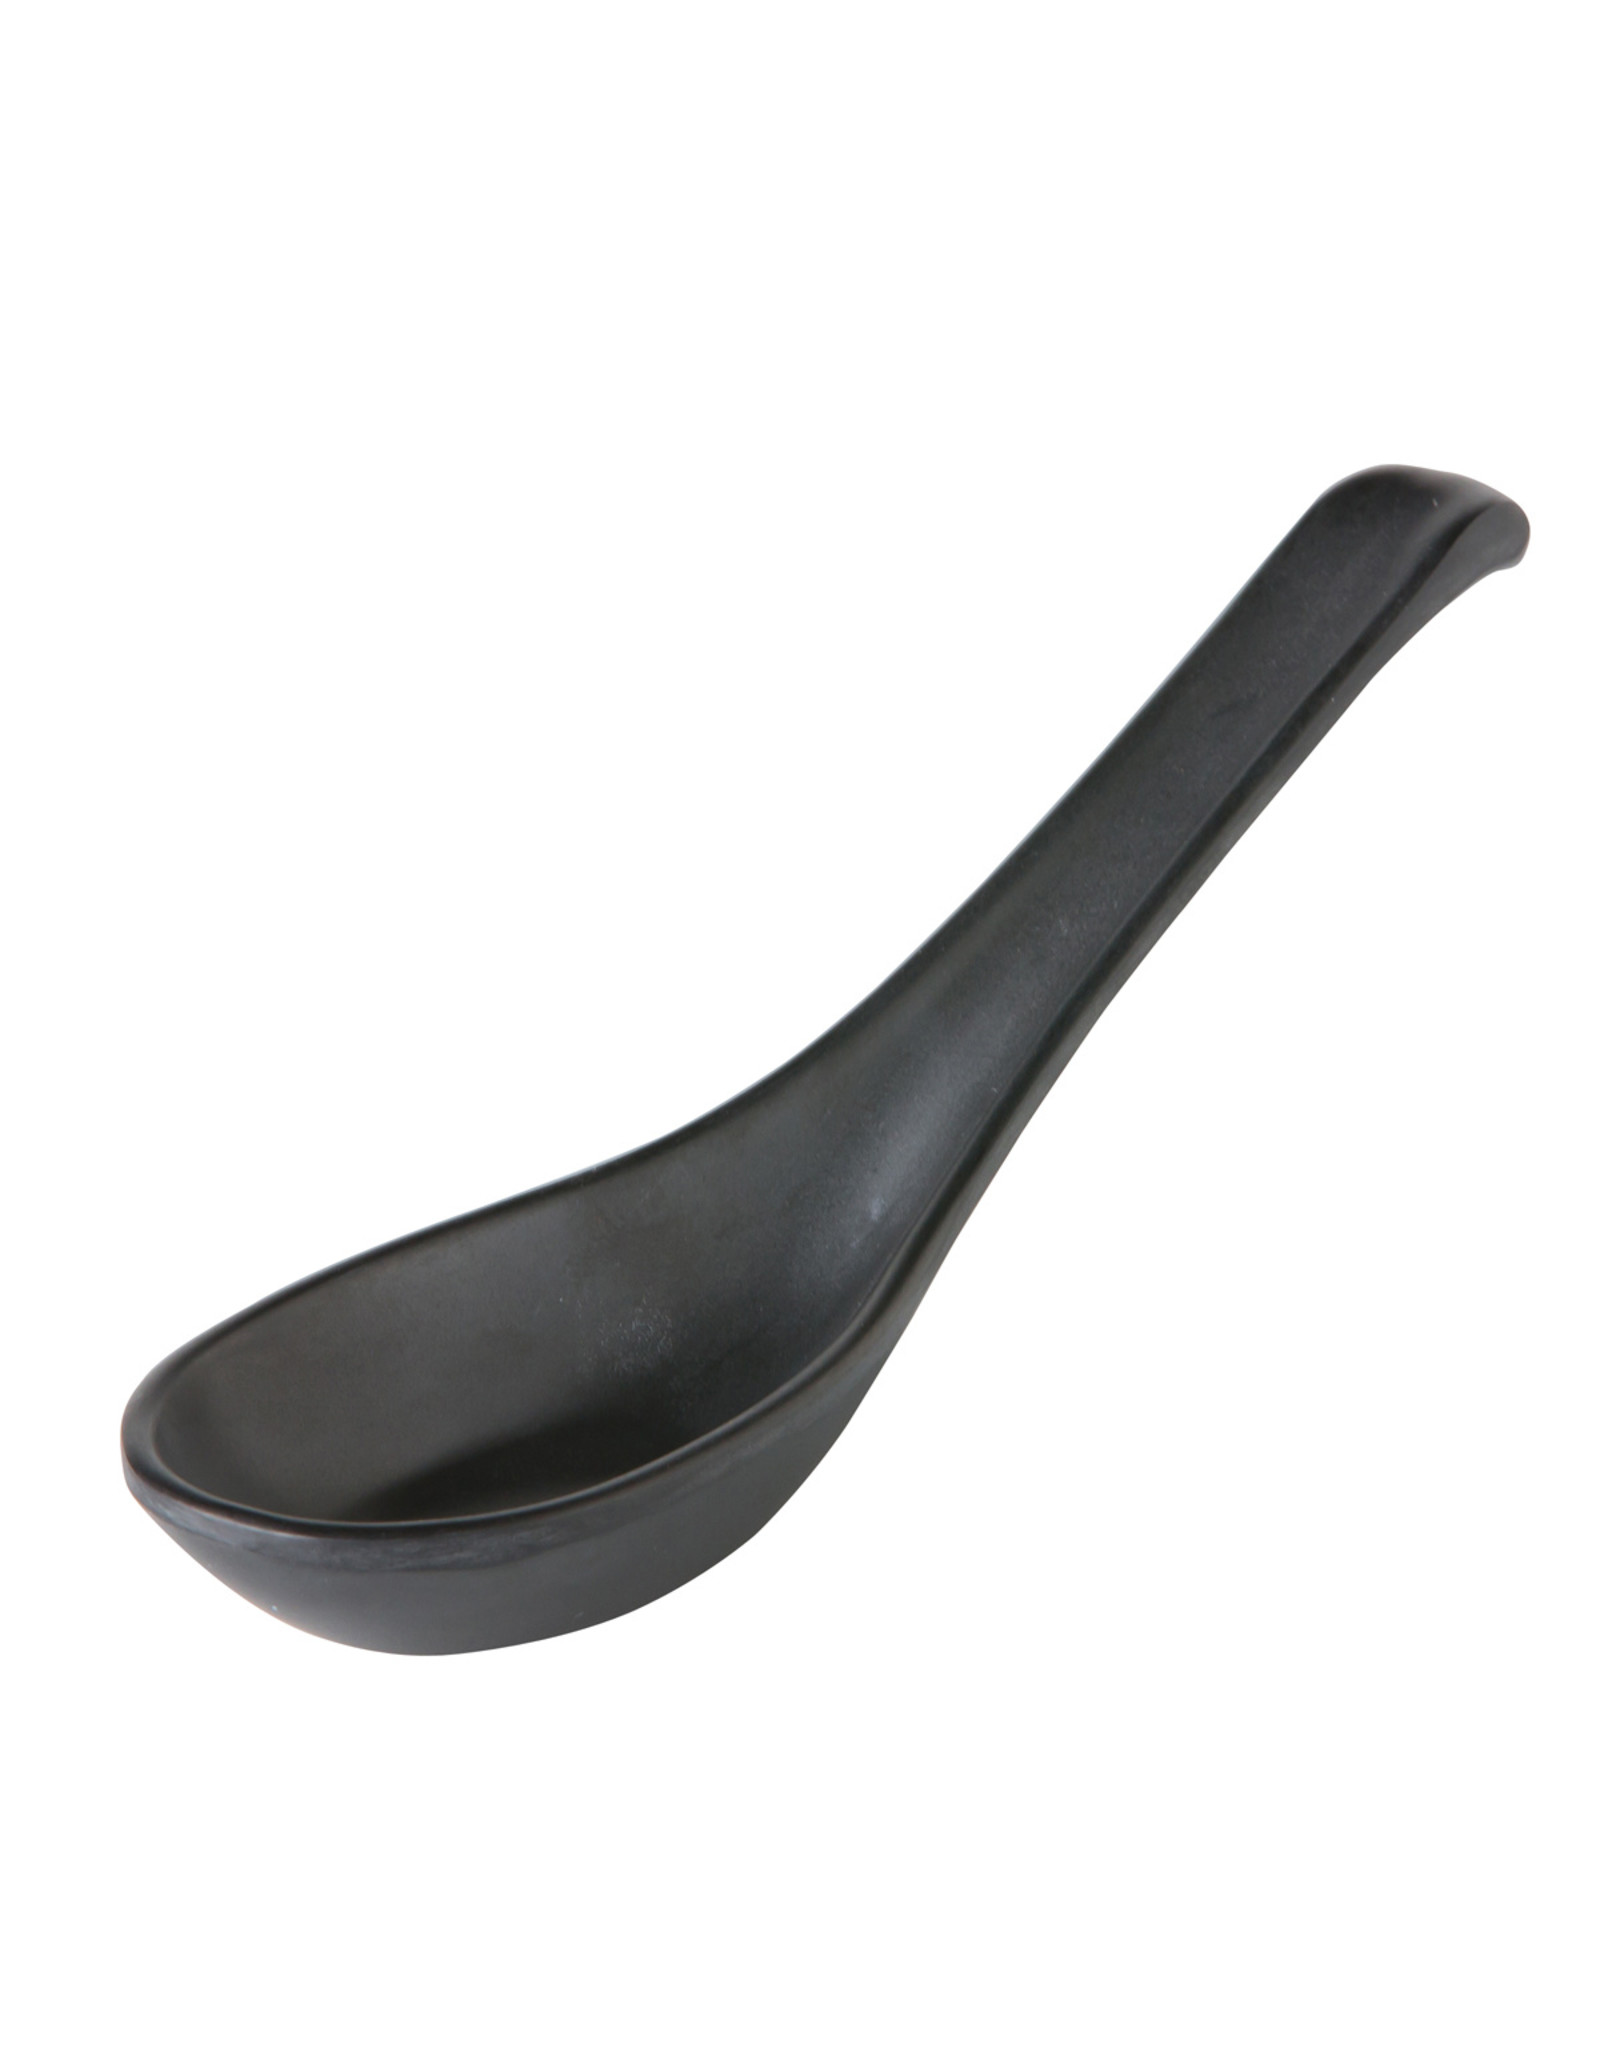 Stylepoint Chinese spoon Asia 14,5 cm